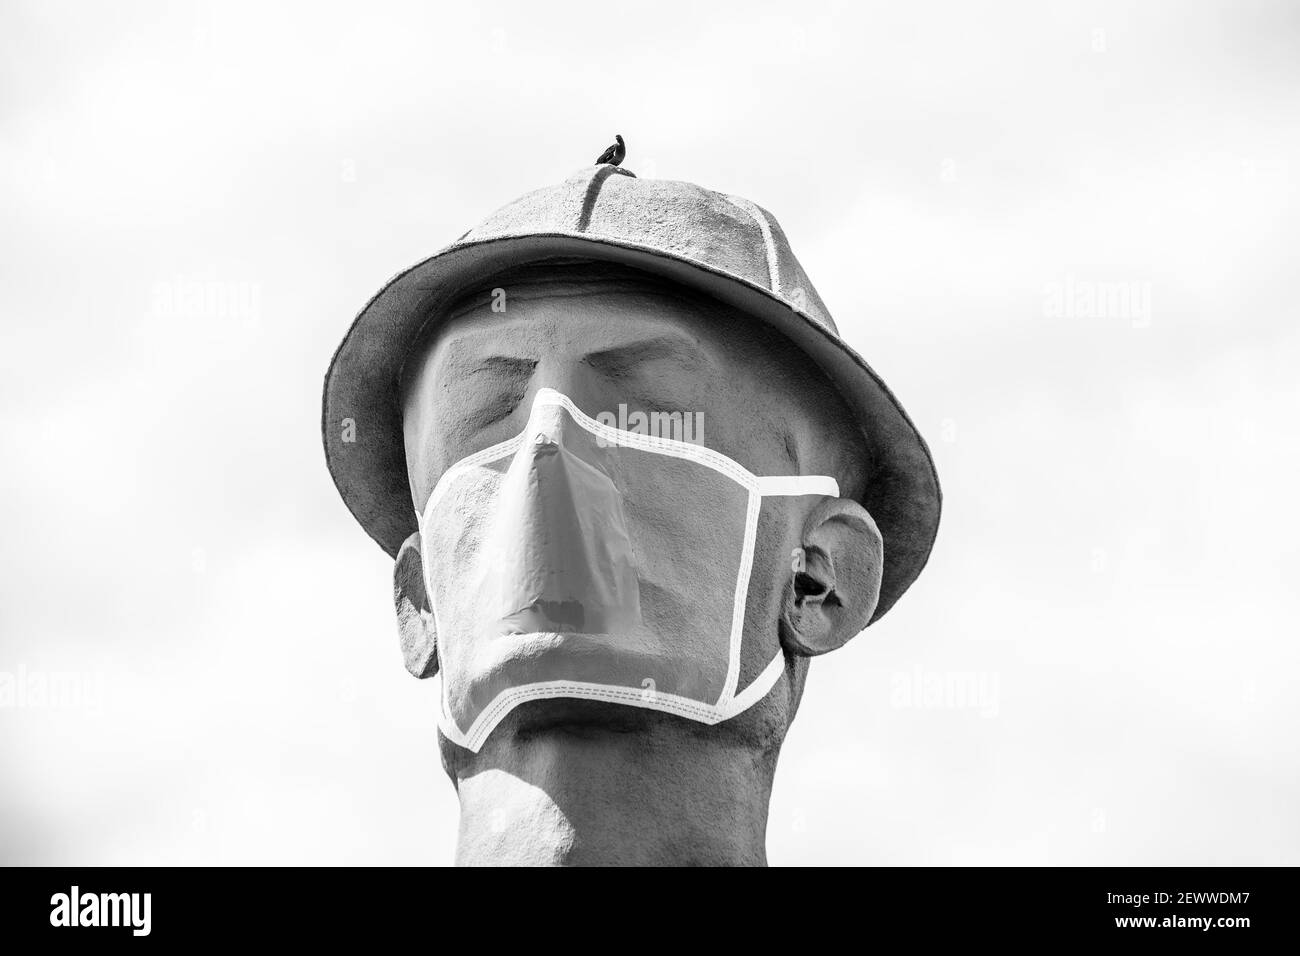 07 09 2020 Tulsa, USA Iconic Golden Driller - Huge statue of oilfield worker  near Route 66 in Oklahoma wearing facial mask during pandemic - Close-up Stock Photo